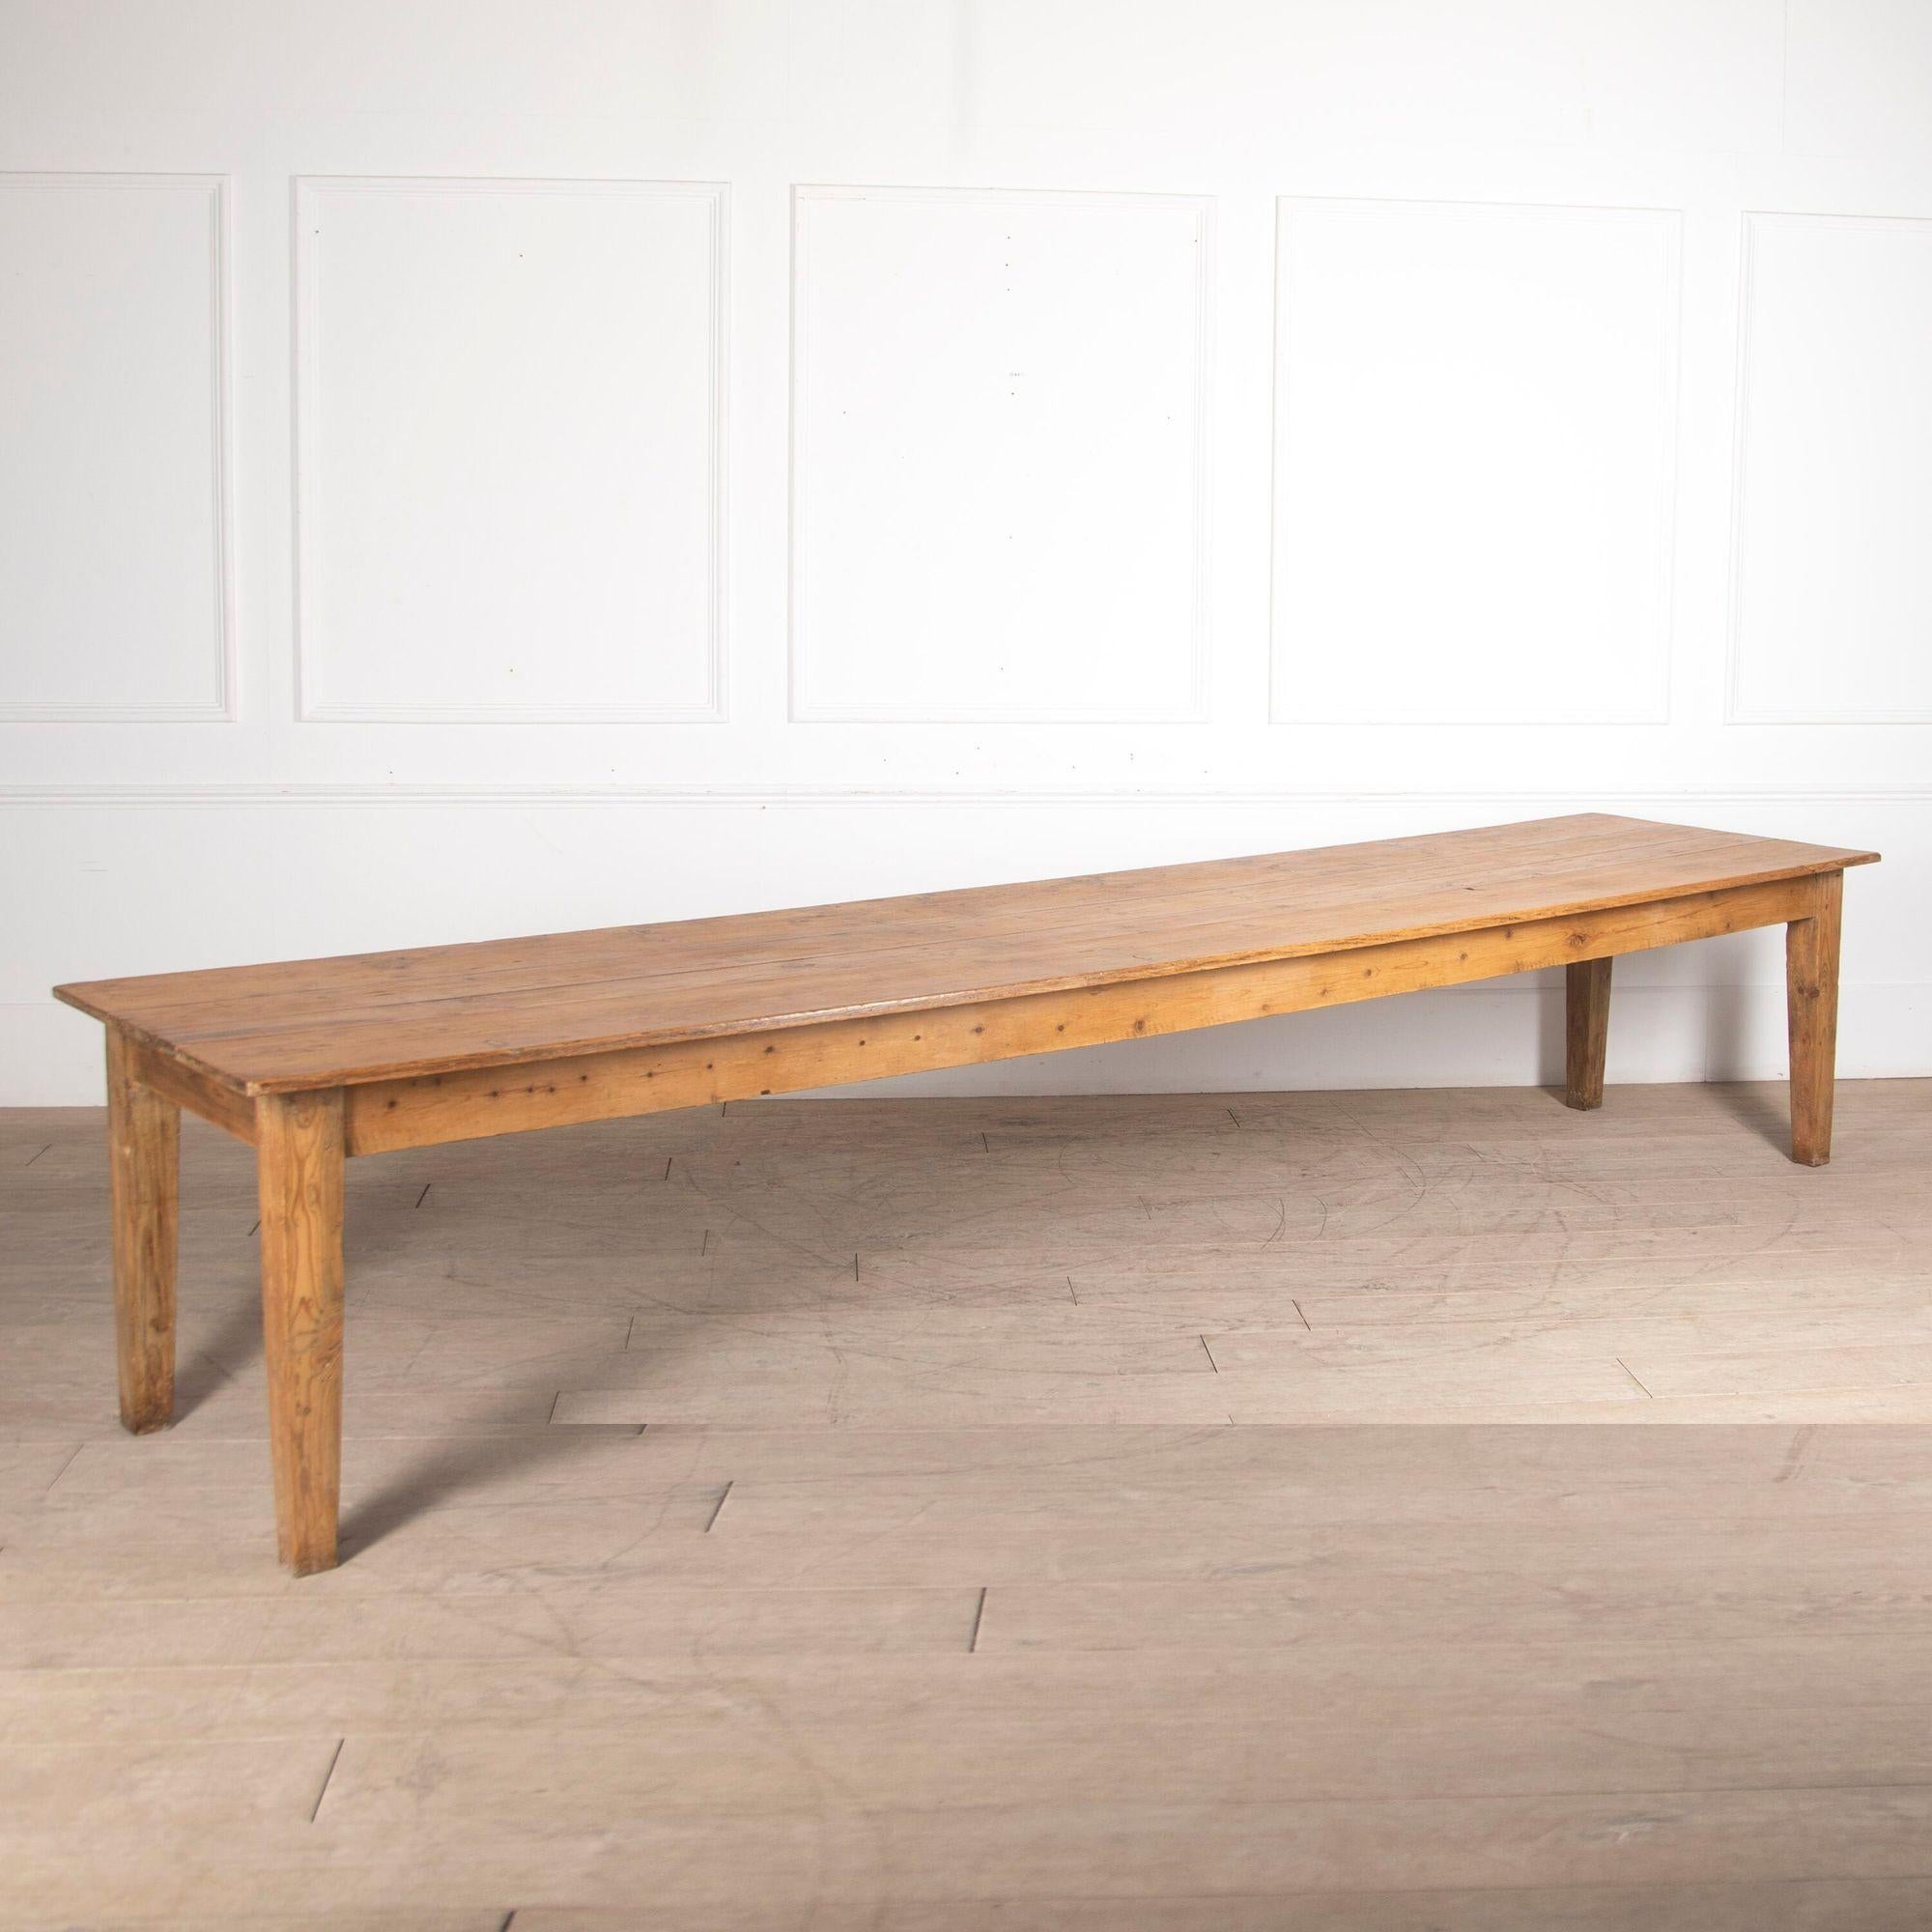 antique refectory table for sale